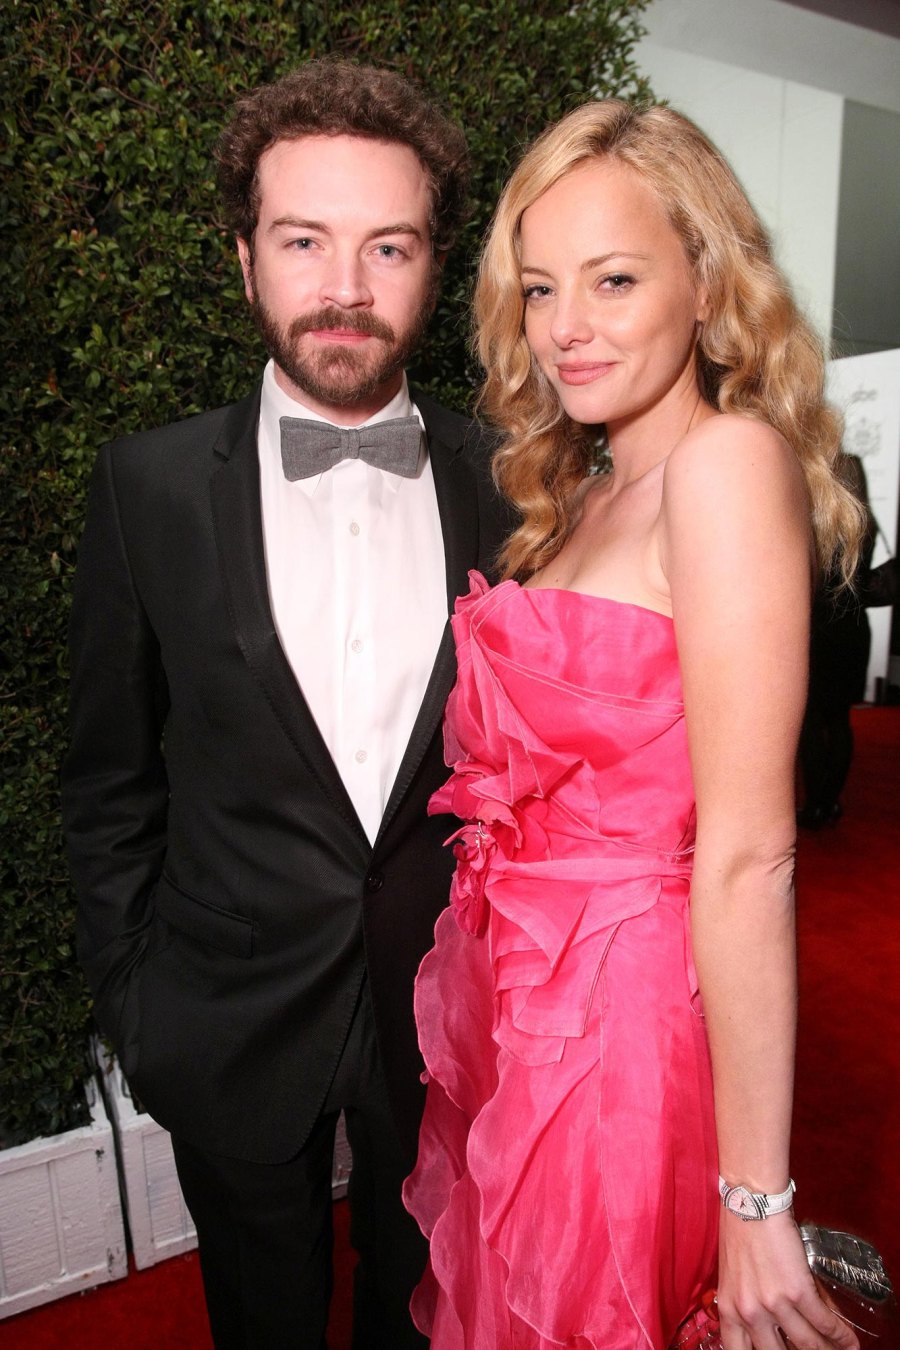 That 70s Show Alum Danny Masterson and Bijou Phillips A Timeline of Their Relationship